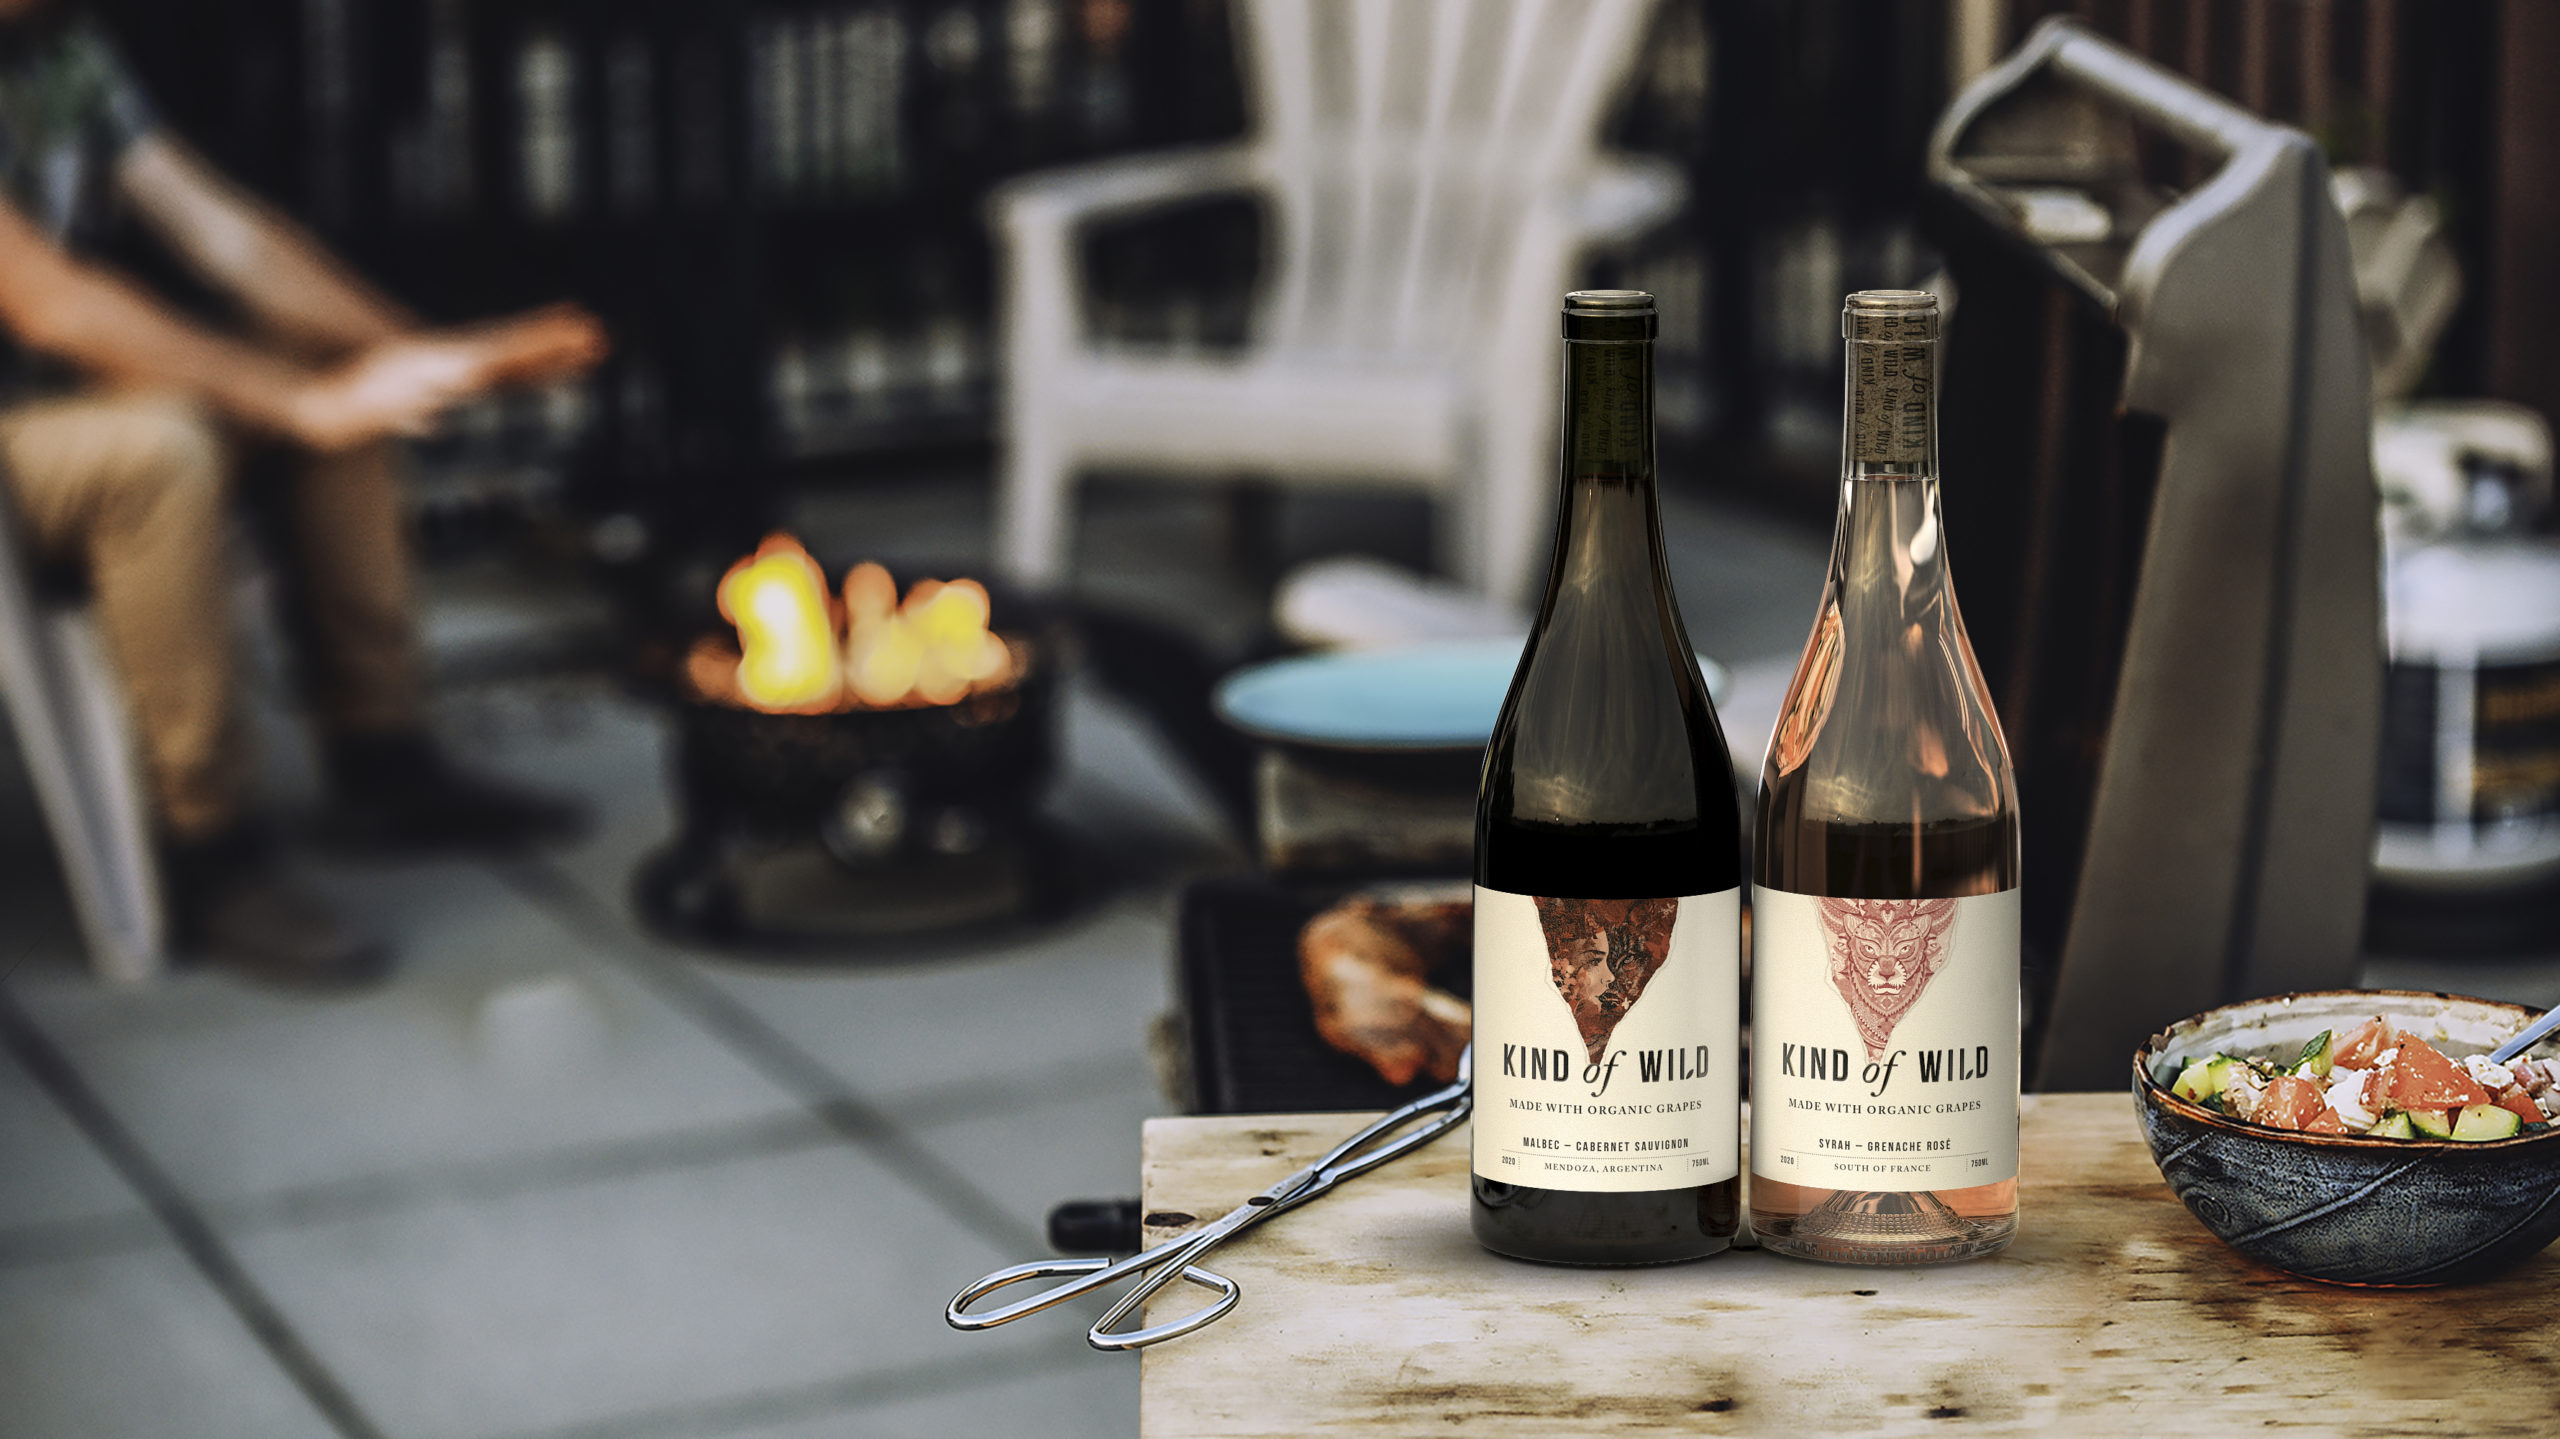 Kind Of Wild Organic Wines Launch During Wild Time In World